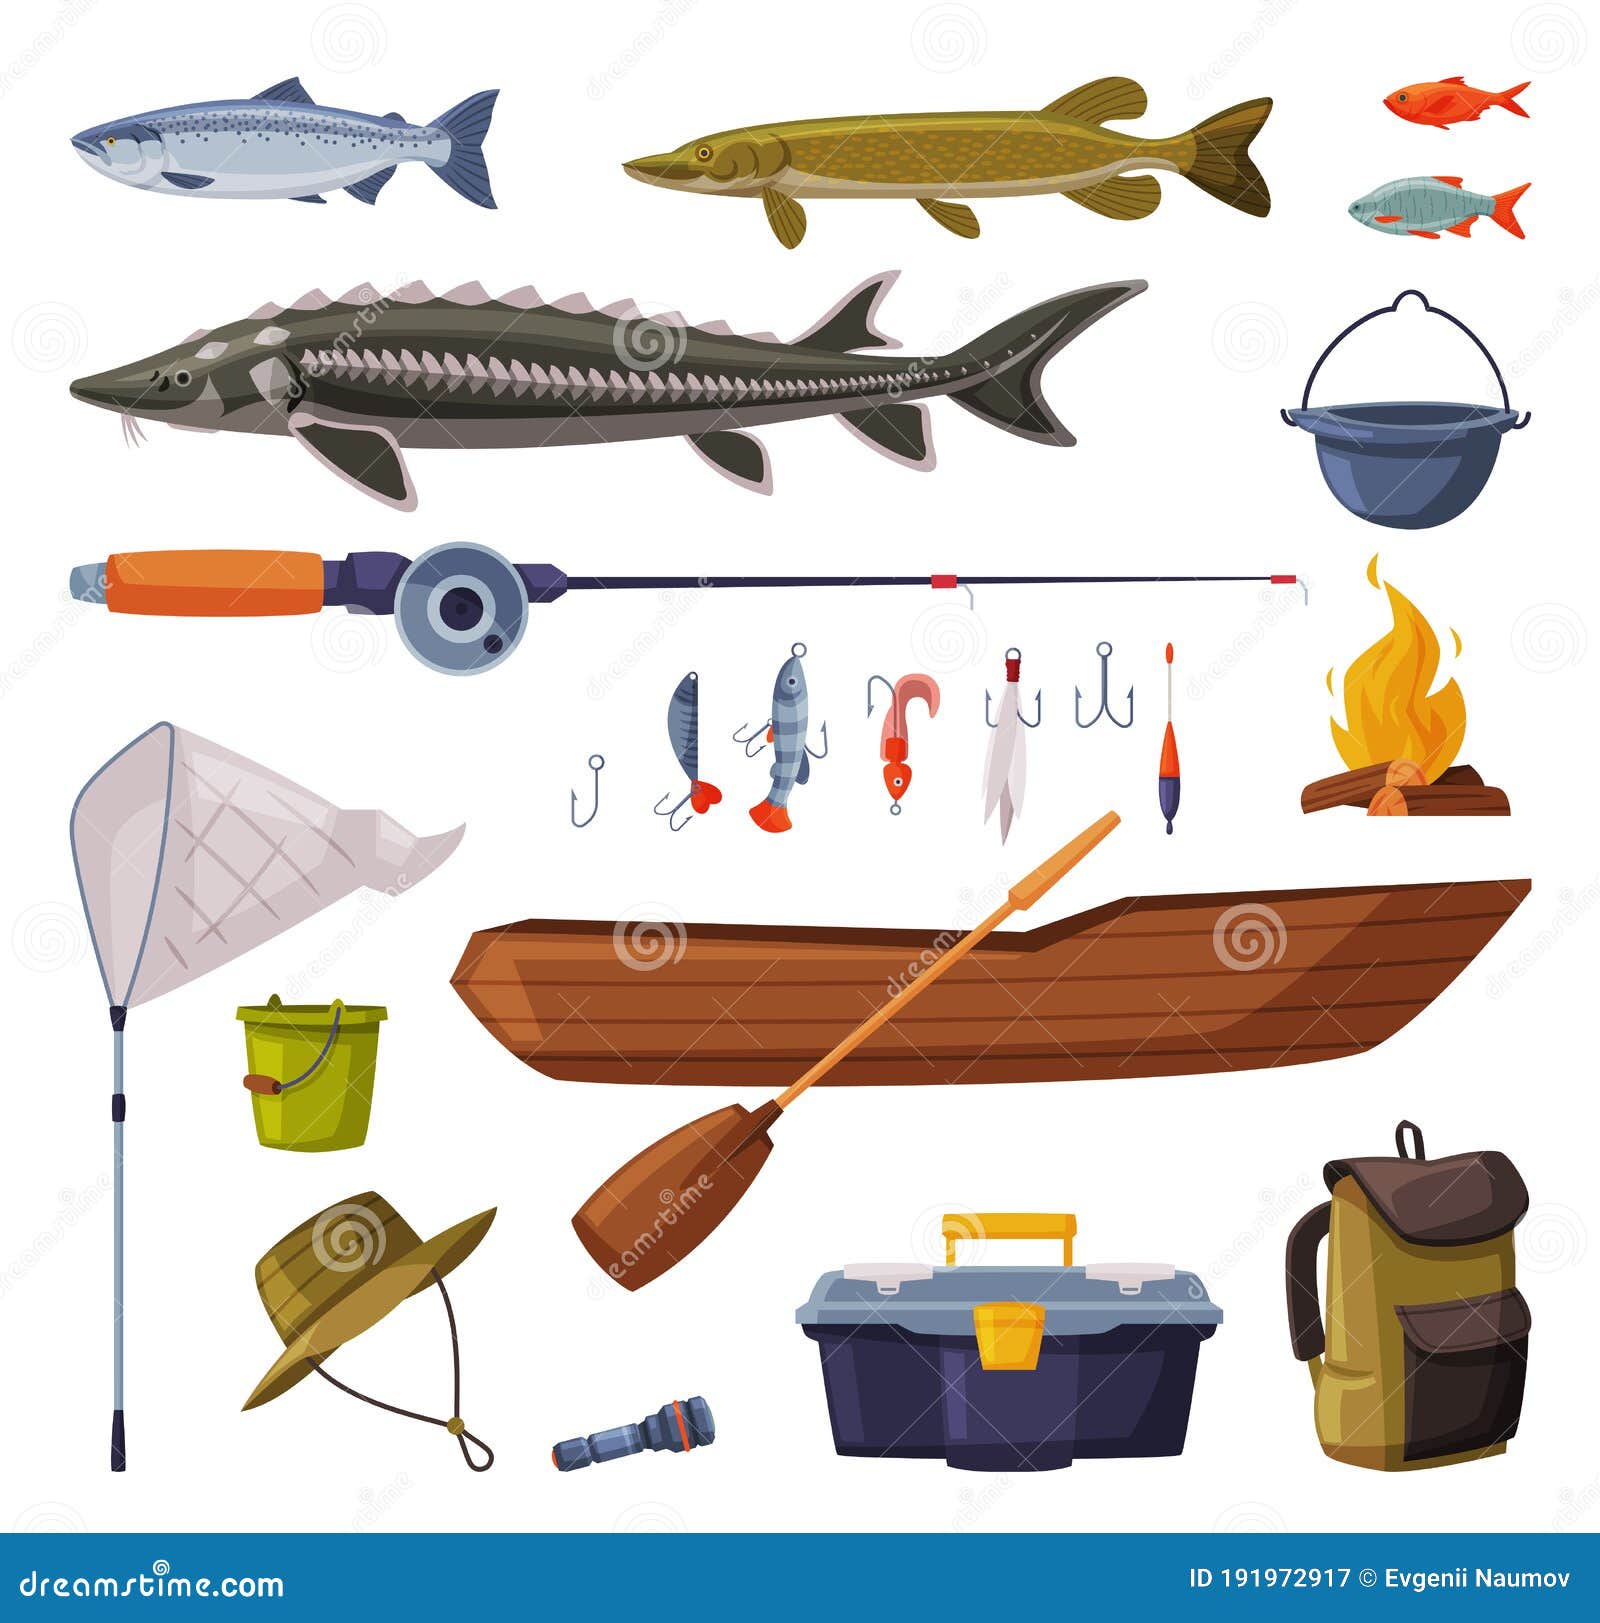 Fishing Equipment Set, Freshwater Fishes, Fishing Tools, Apparel, Boat,  Accessories Cartoon Vector Illustration Stock Vector - Illustration of  lure, angling: 191972917